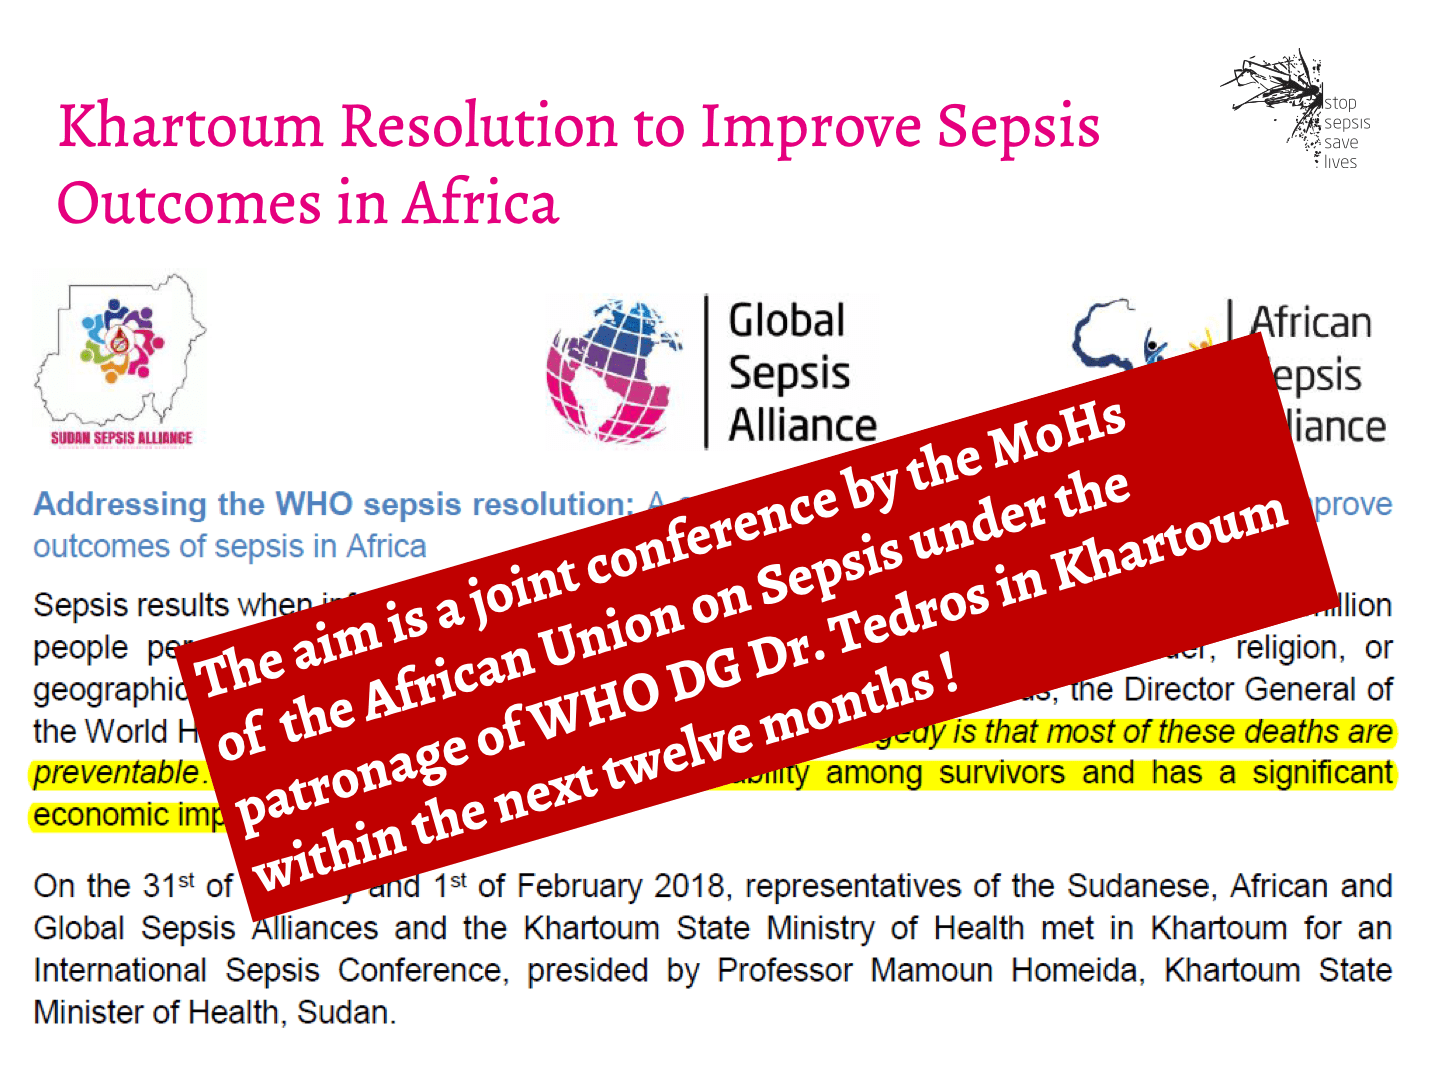 Strategy of the GSA to Implement WHO Sepsis Resolution15.png